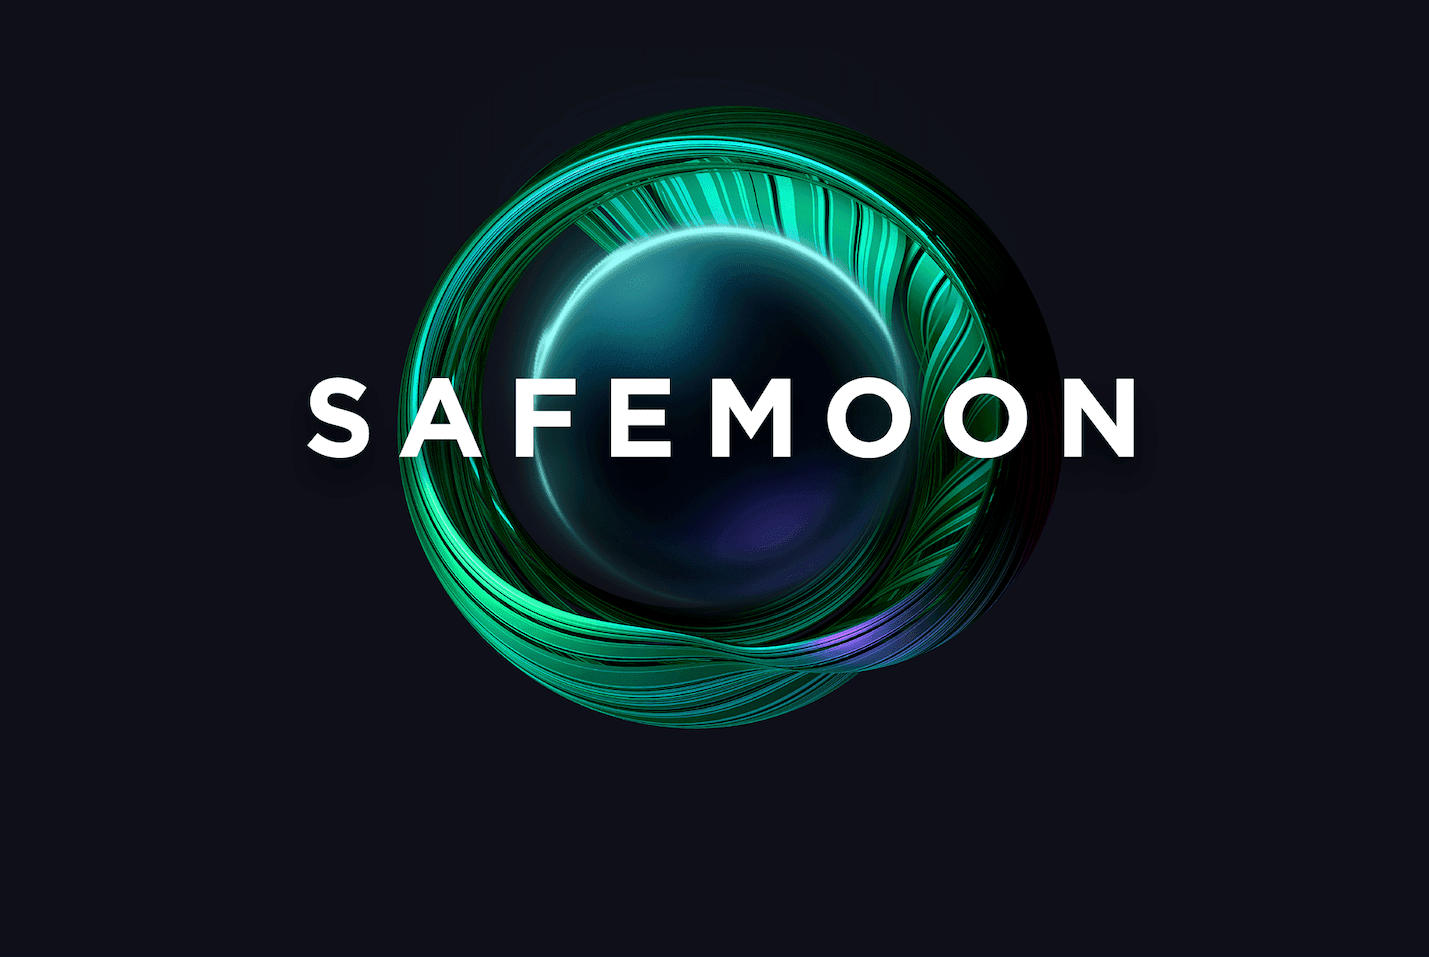 SafeMoon CEO Released